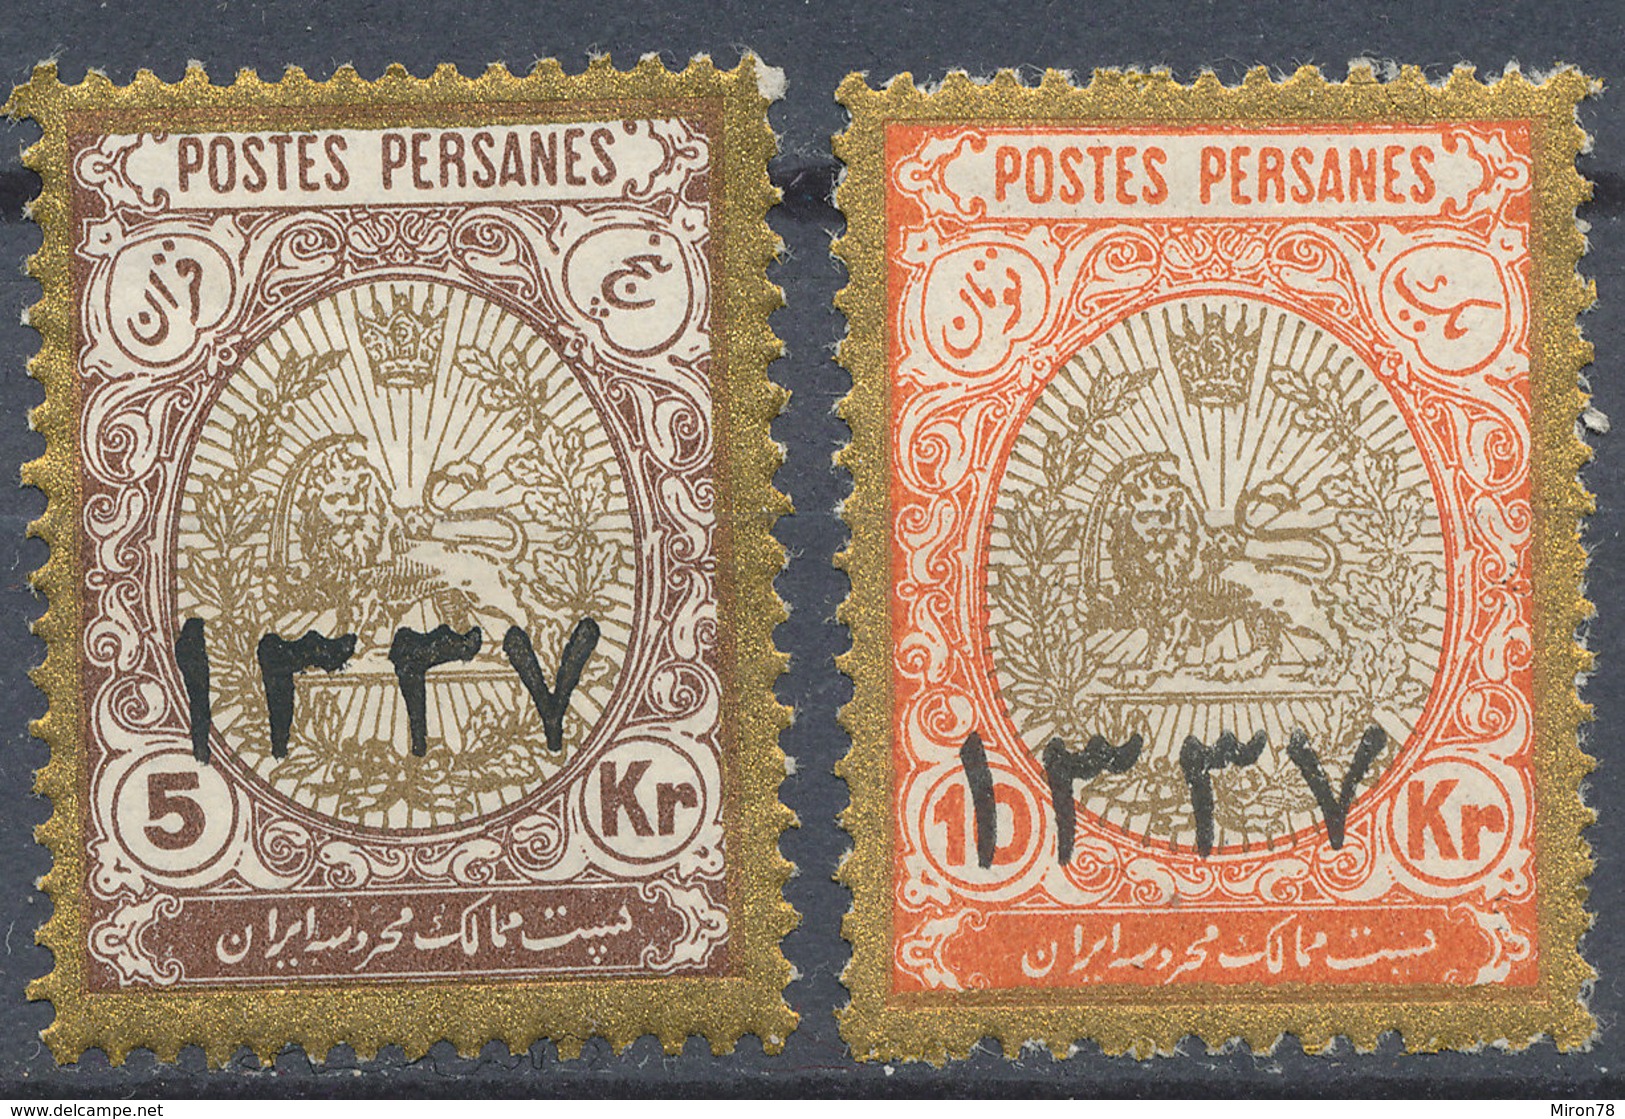 Stamp Iran MIDLE EAST 1918 POSTES PERSANES STAMPS ARMS SET TO 30k MINT OG VF, CAT £1000  Lot21 - Iran